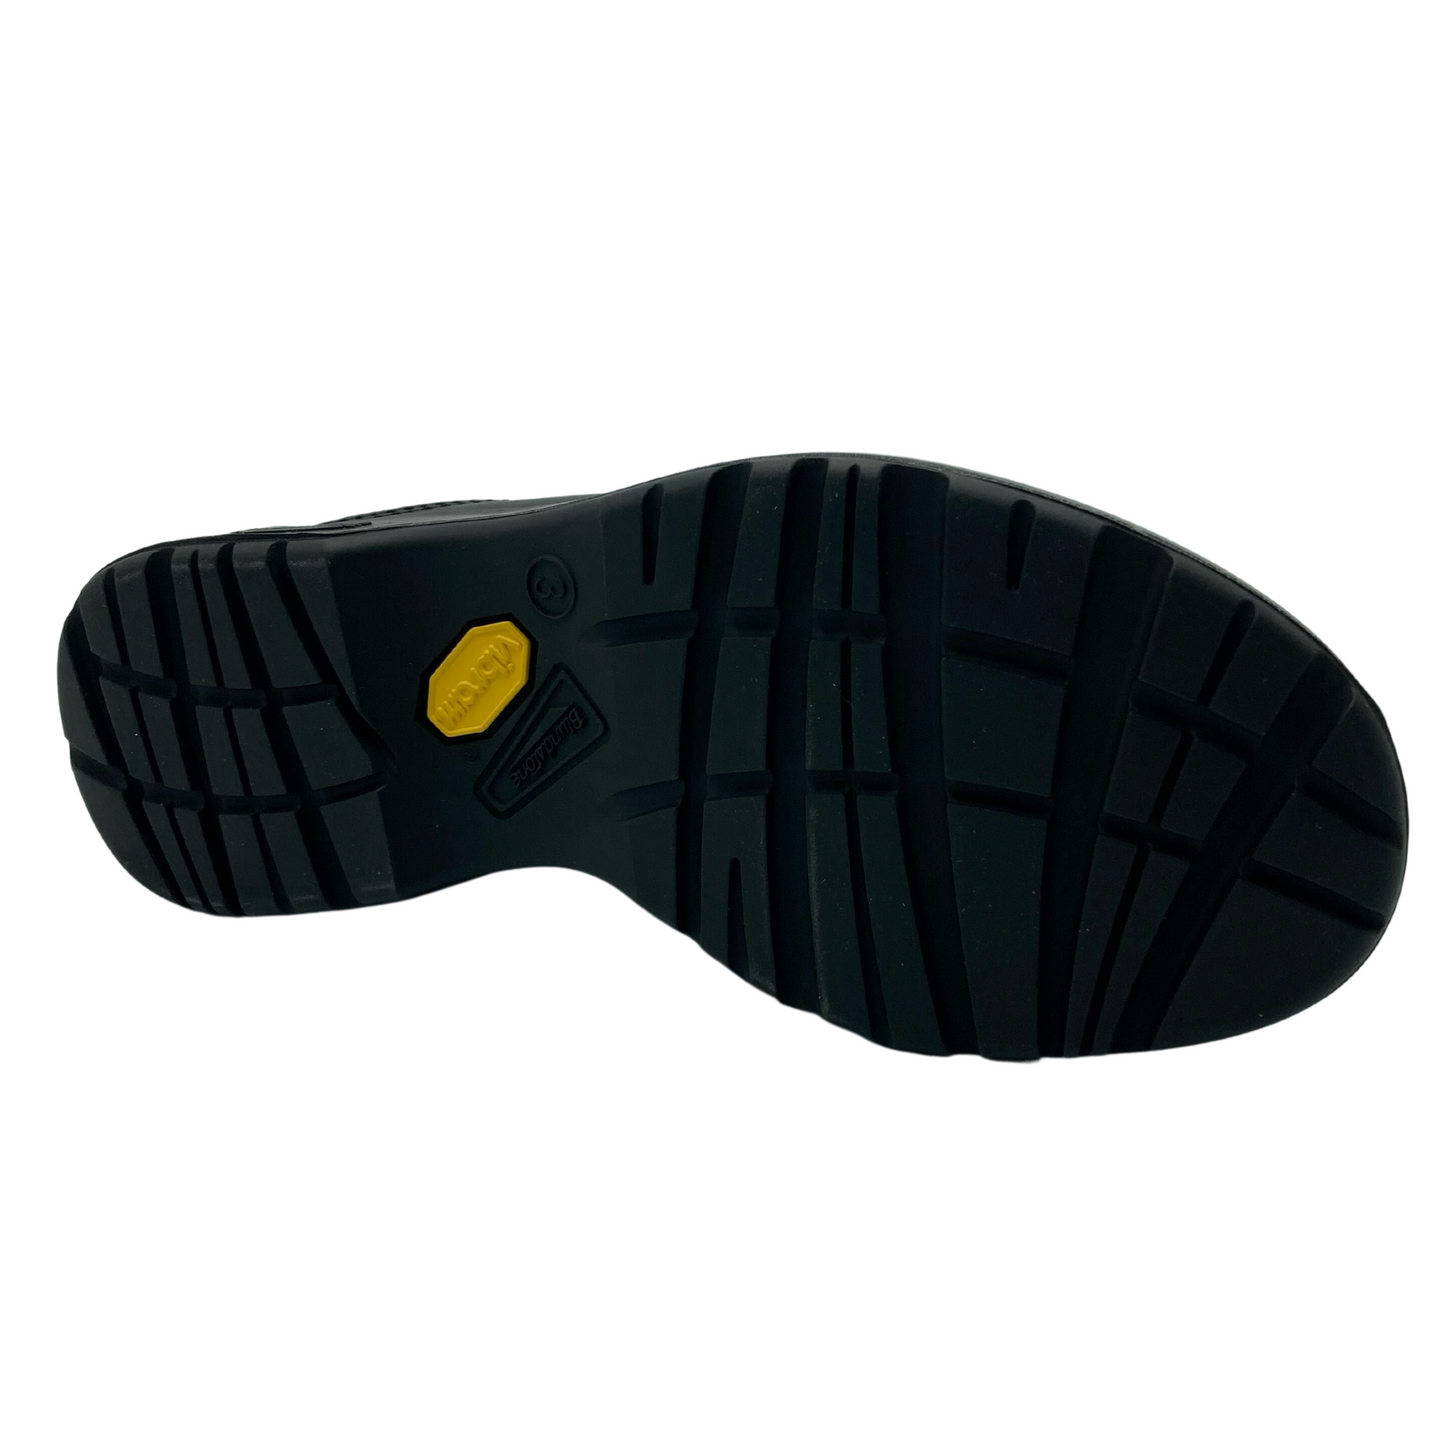 Bottom view of black leather clog with black rubber outsole